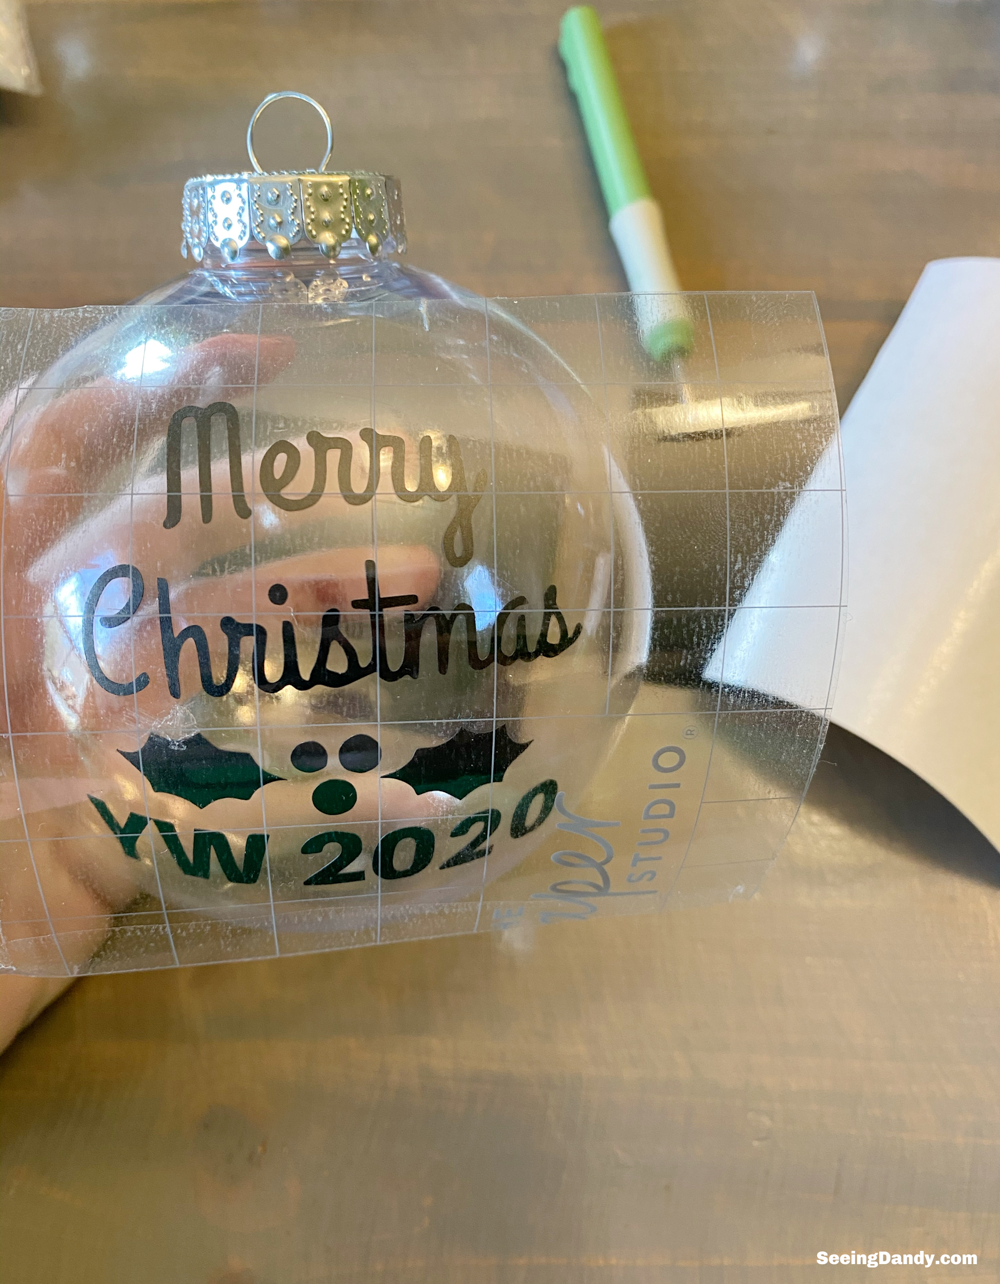 merry christmas yw 2020 vinyl, holly berry vinyl image, clear craft ornaments